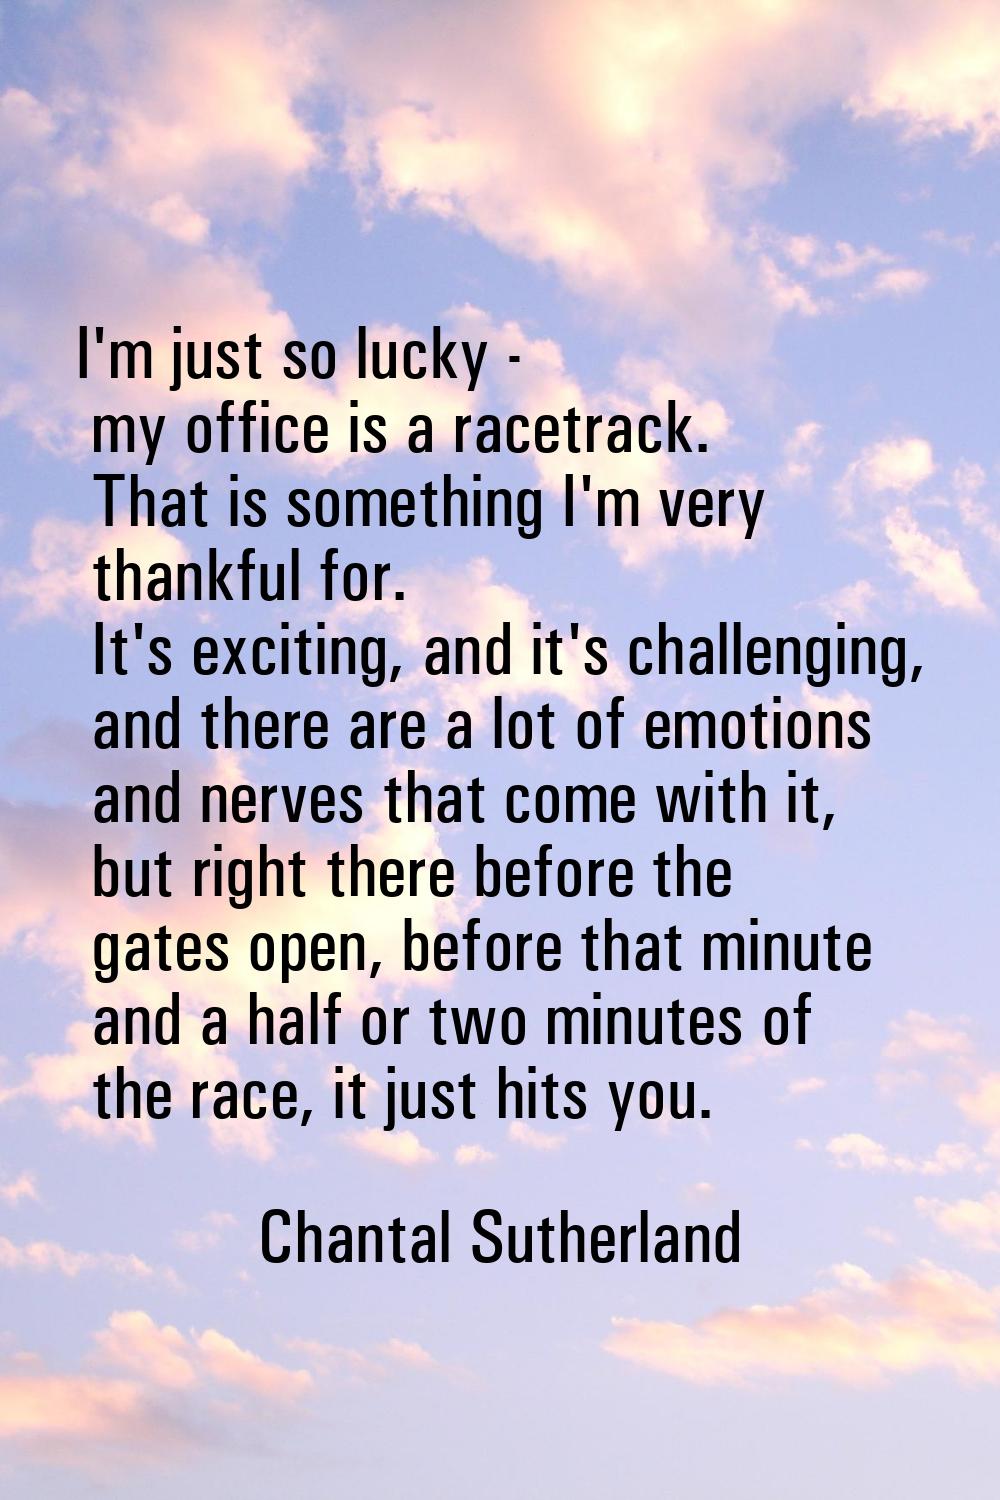 I'm just so lucky - my office is a racetrack. That is something I'm very thankful for. It's excitin